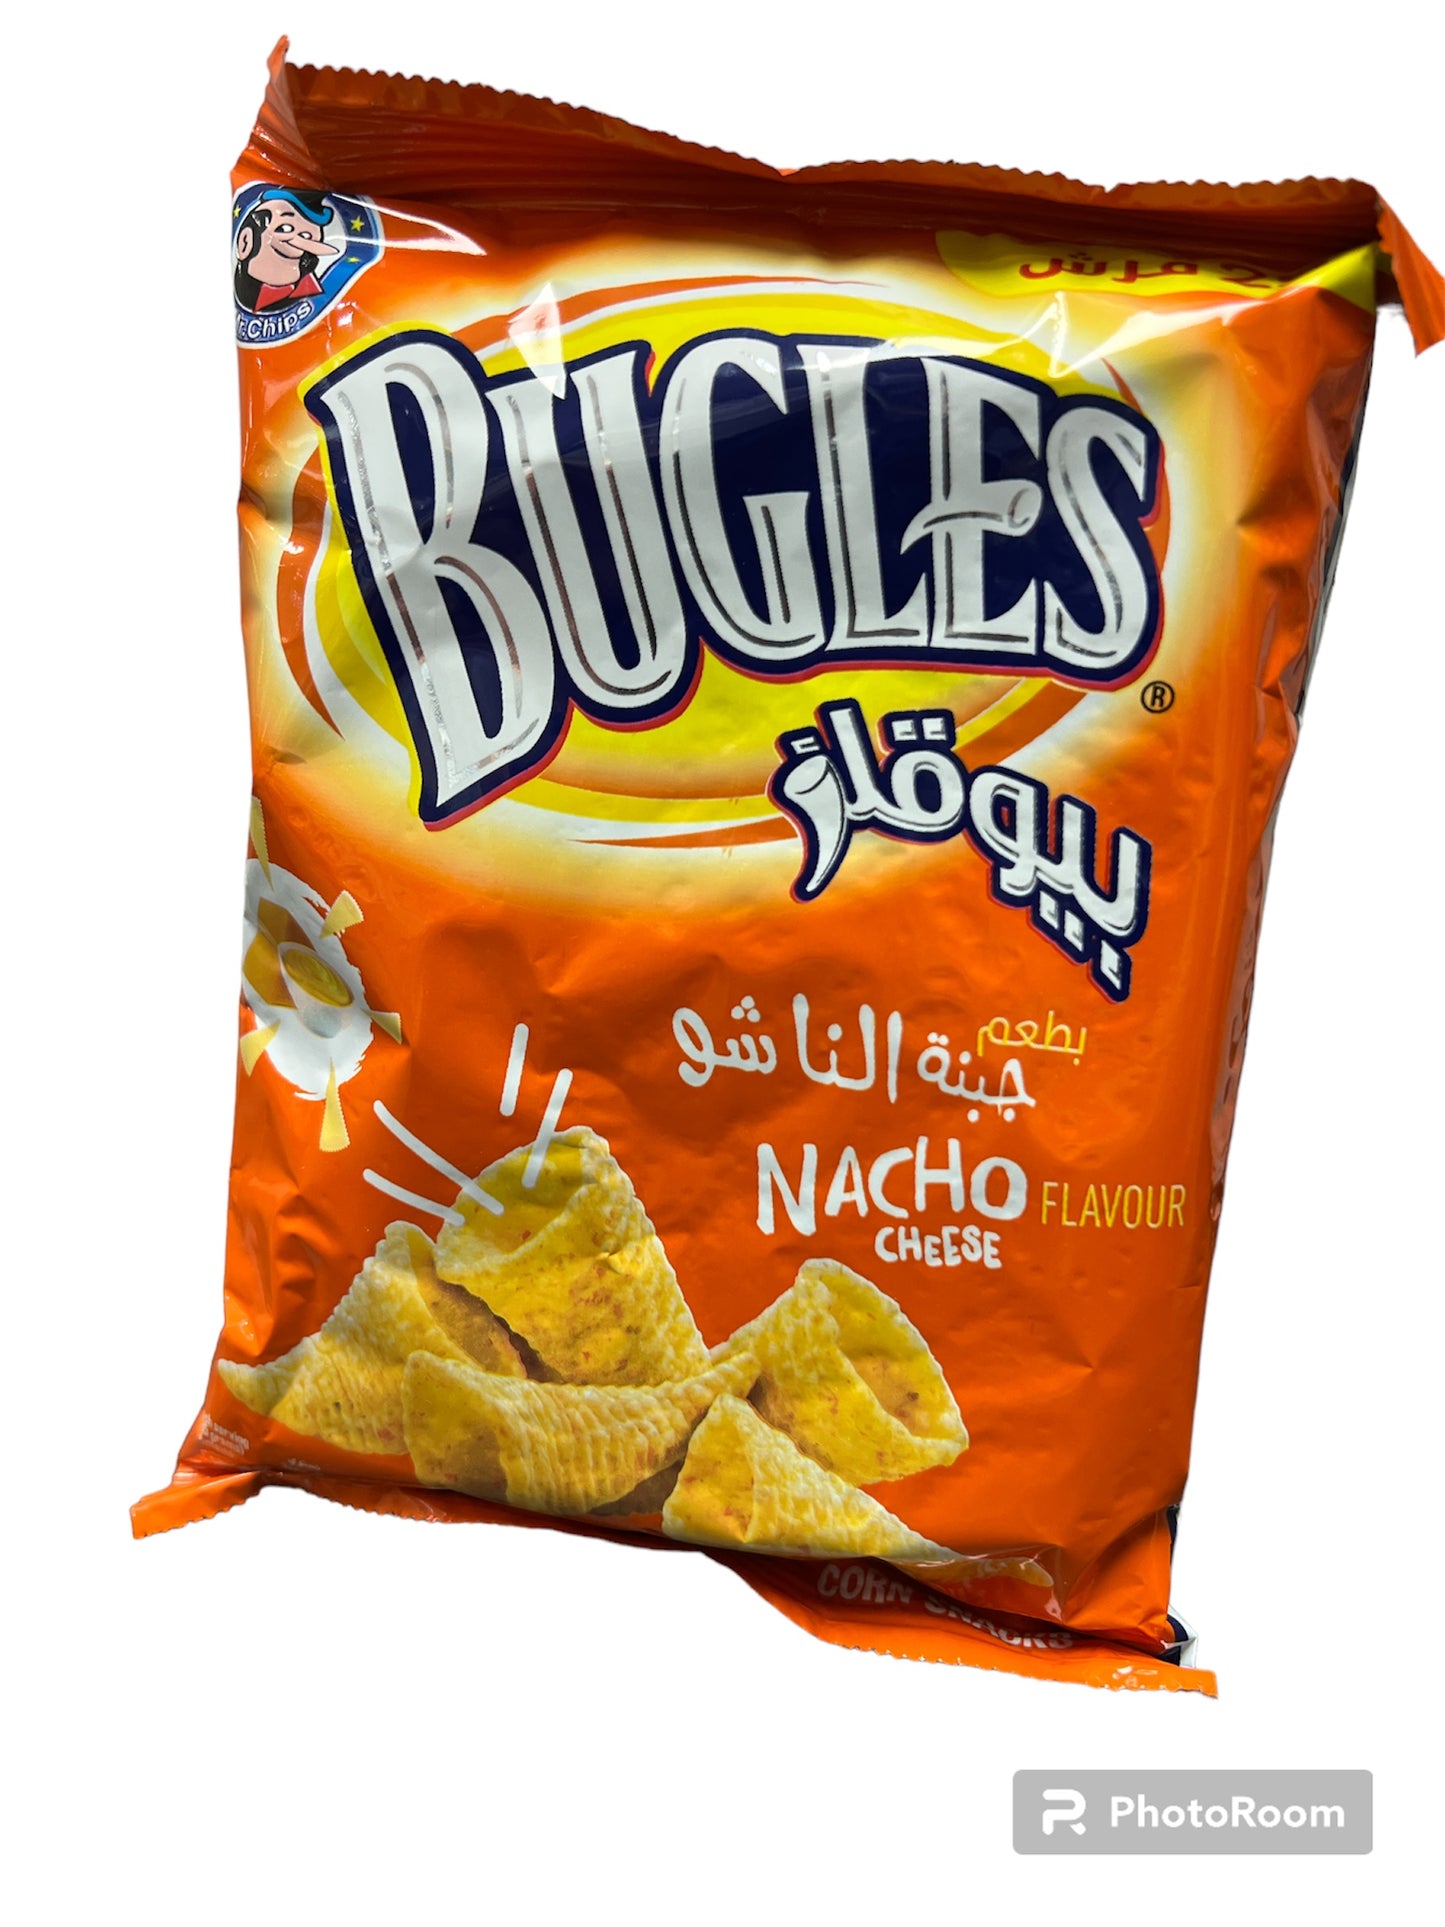 BUGLES chips